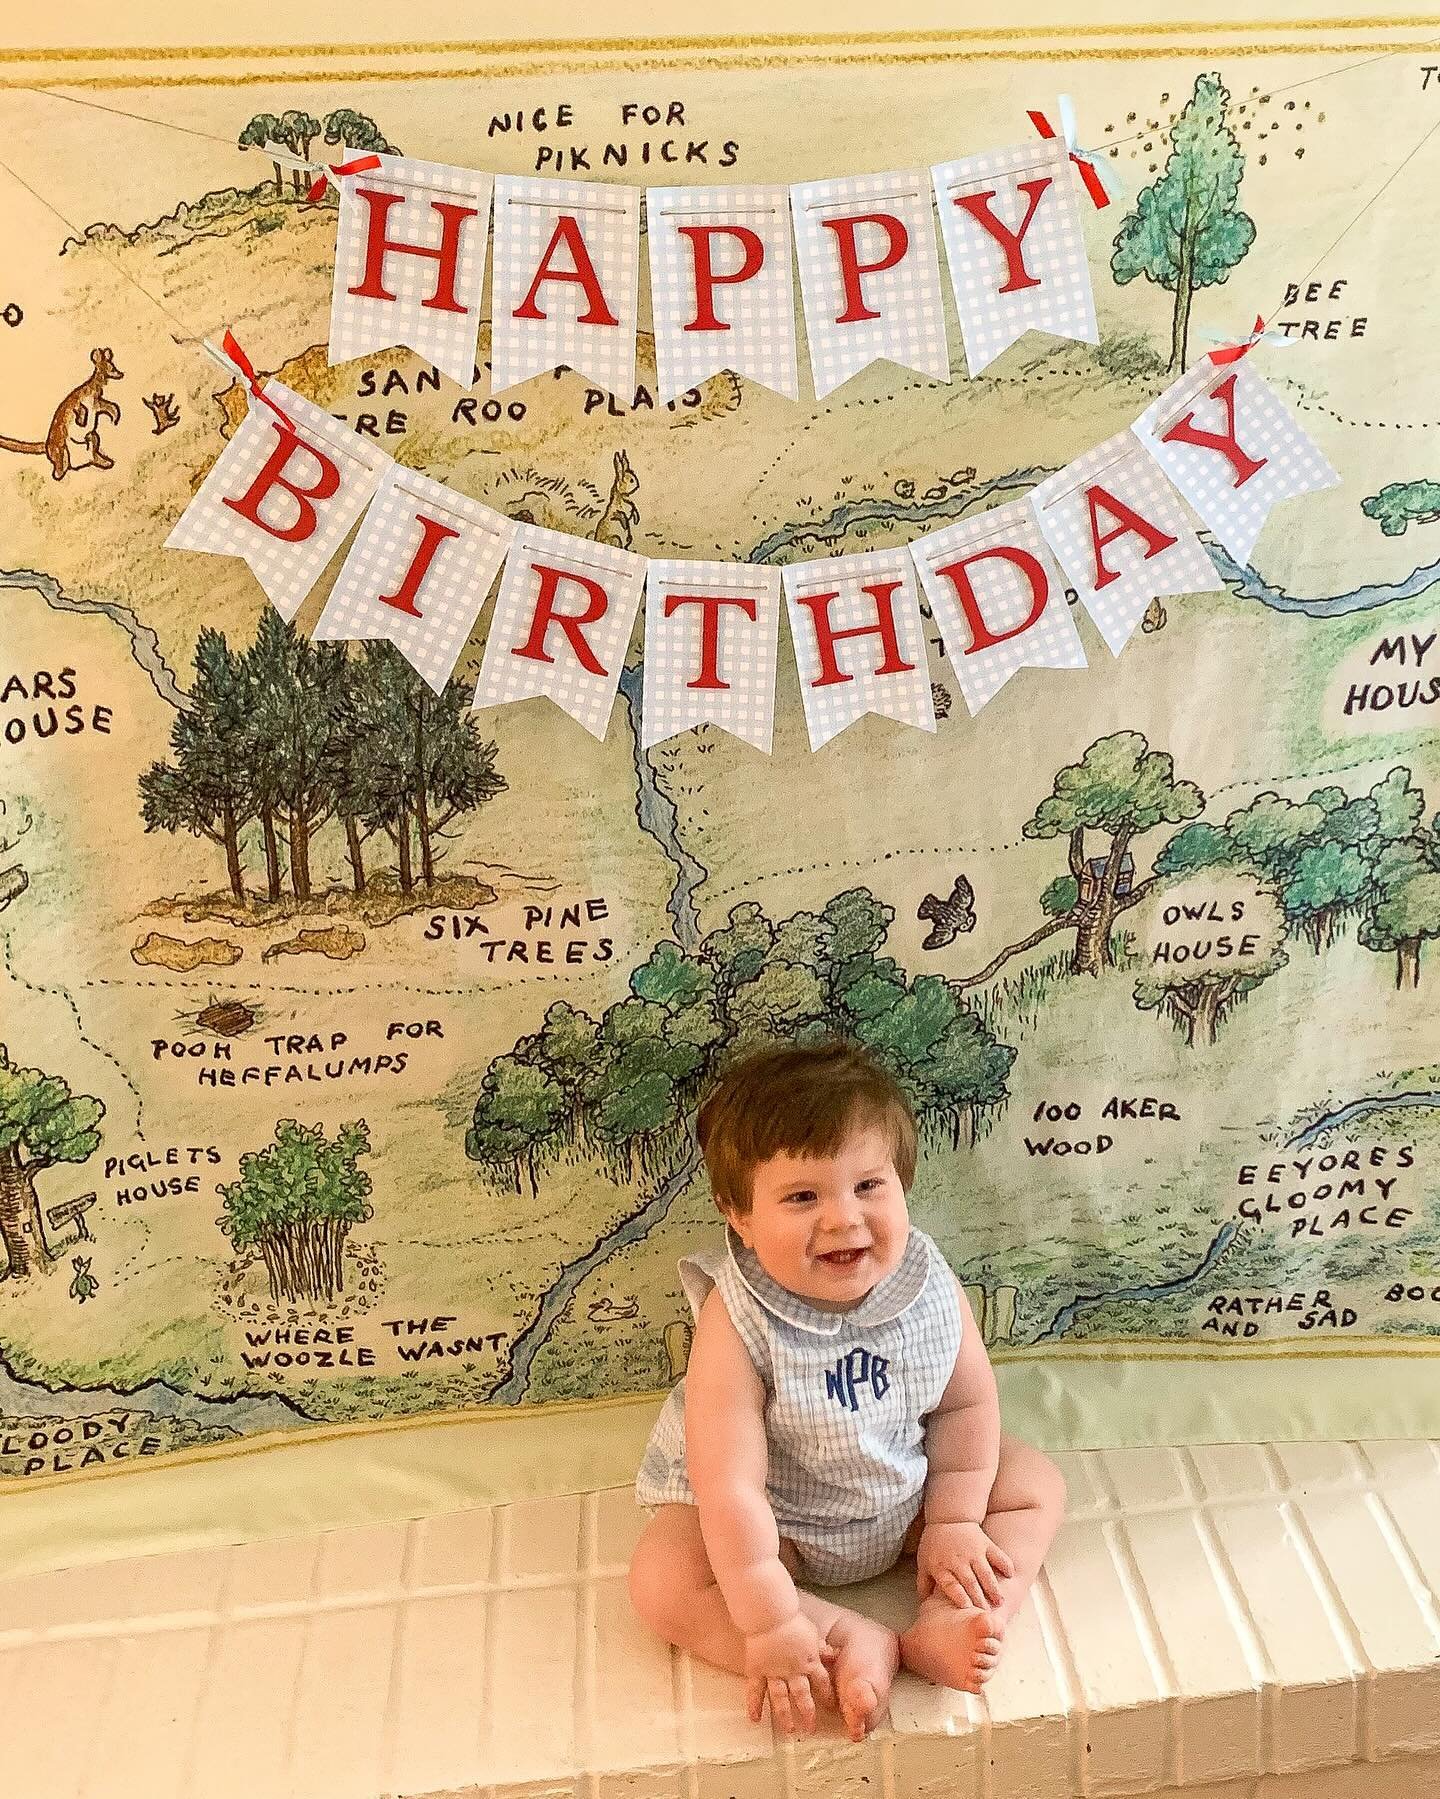 We celebrated our sweet little baby boy turning one with close family and friends. I cannot believe that a year has already gone by in time because it feels like we were just bringing him home with us from the hospital. Life moves fast and the only w